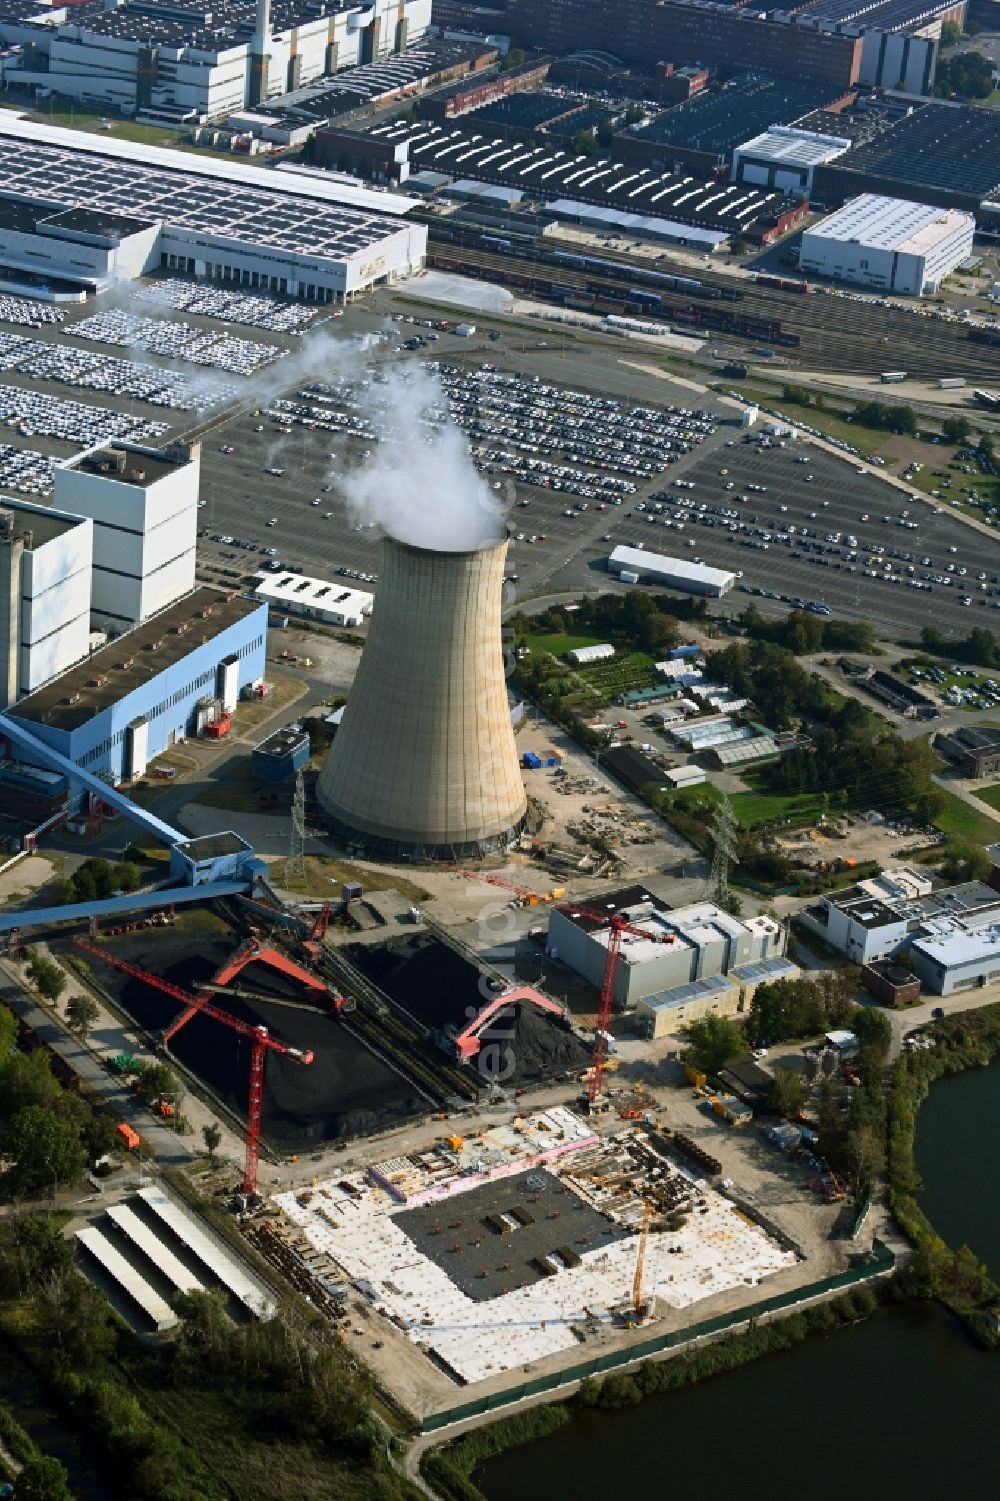 Aerial image Wolfsburg - Construction site to build a new combined cycle power plant with gas and steam turbine systems on factory premises of VW Volkswagen AG in Wolfsburg in the state Lower Saxony, Germany